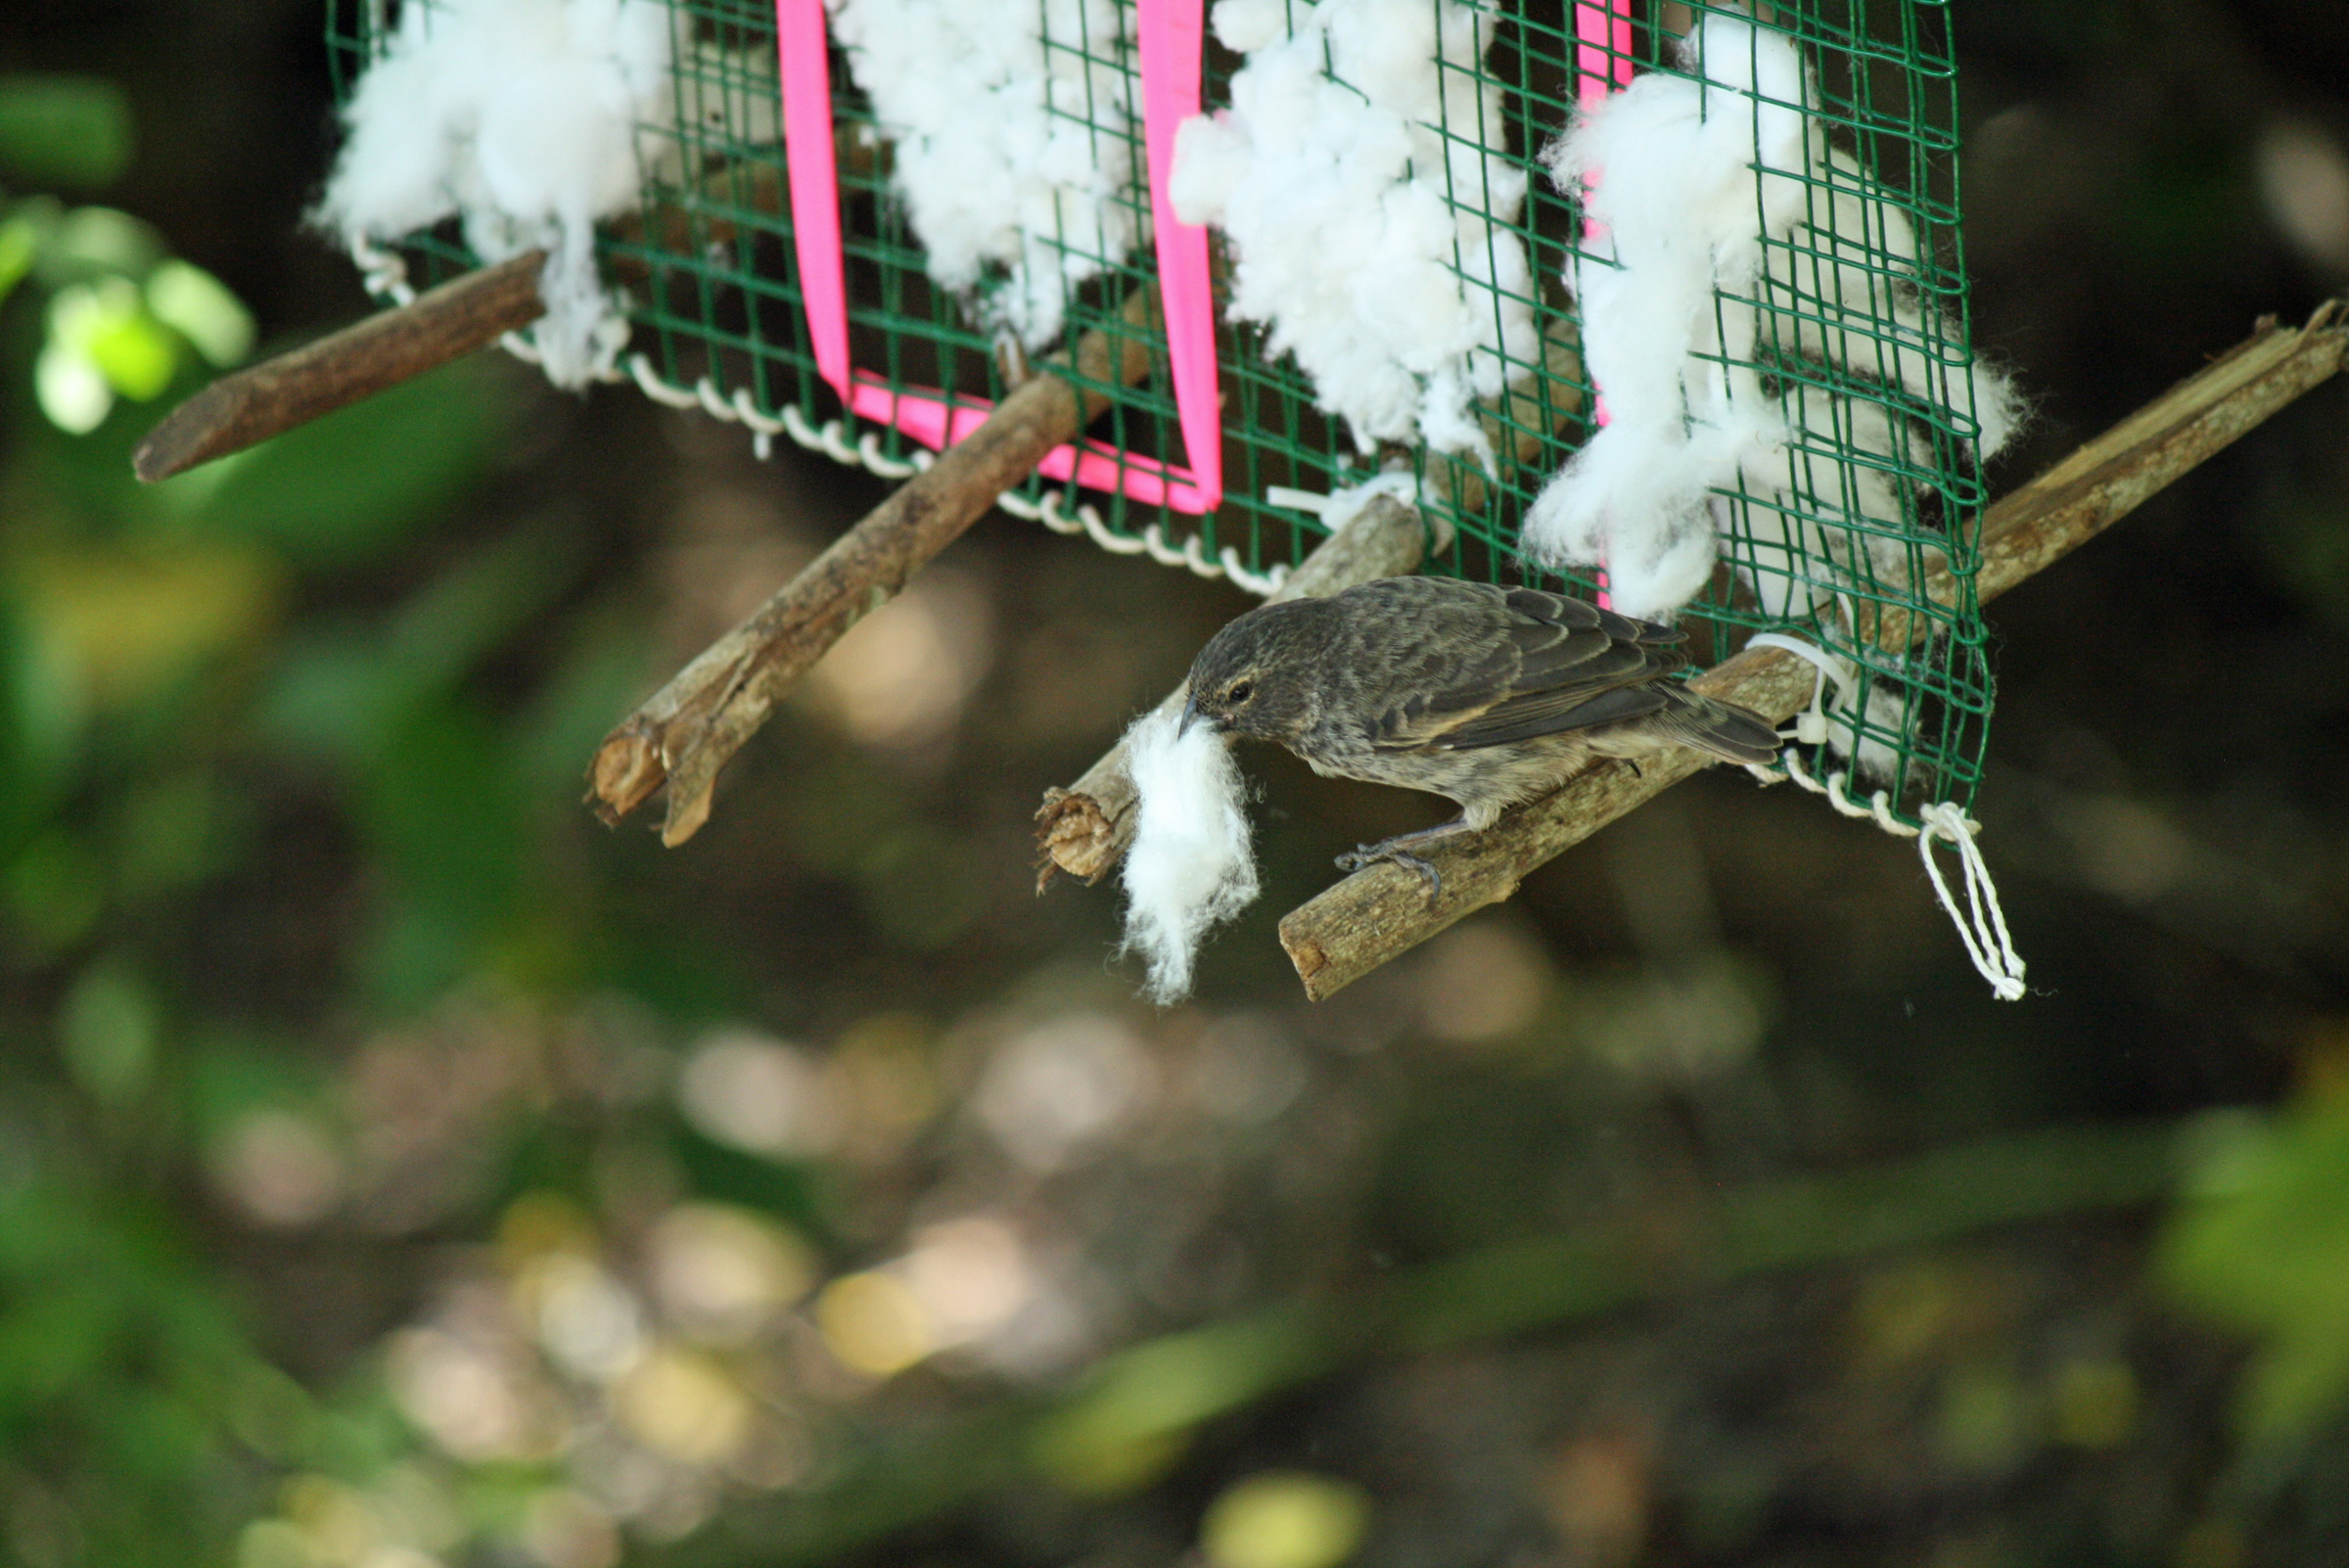 A finch in Ecuador’s Galapagos Islands pulls a cotton ball from a dispenser set out by scientists. A University of Utah study showed that when the cotton is treated with permethrin – a mild pesticide used in human head-louse shampoo – and the birds use the cotton in their nests, blood-sucking fly maggots are killed, thereby protecting the finches and their offspring that often fall prey to the maggots.      A finch in Ecuador’s Galapagos Islands pulls a cotton ball from a dispenser set out by scientists. A University of Utah study showed that when the cotton is treated with permethrin – a mild pesticide used in human head-louse shampoo – and the birds use the cotton in their nests, blood-sucking fly maggots are killed, thereby protecting the finches and their offspring that often fall prey to the maggots.